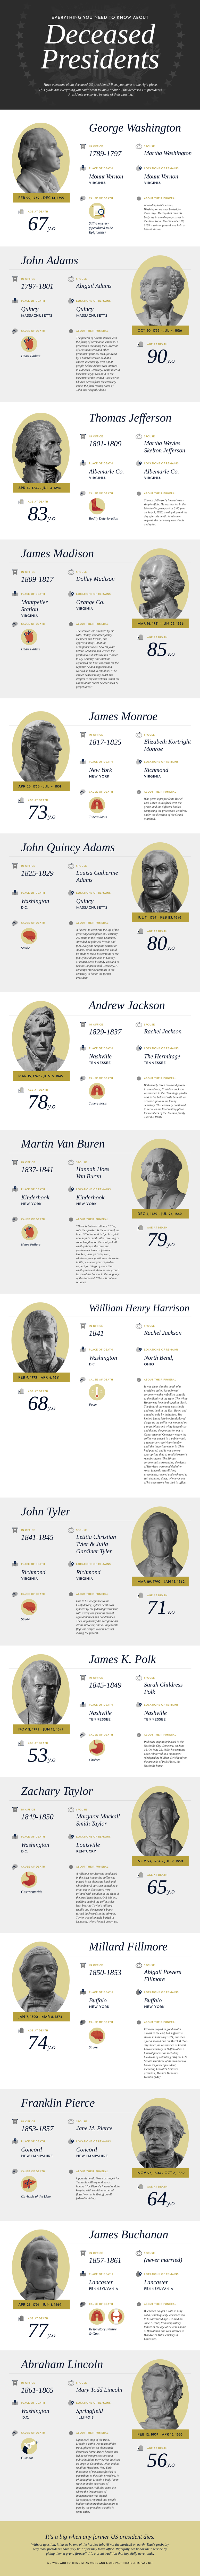 Infographic for Everything You Need to Know About Deceased Presidents